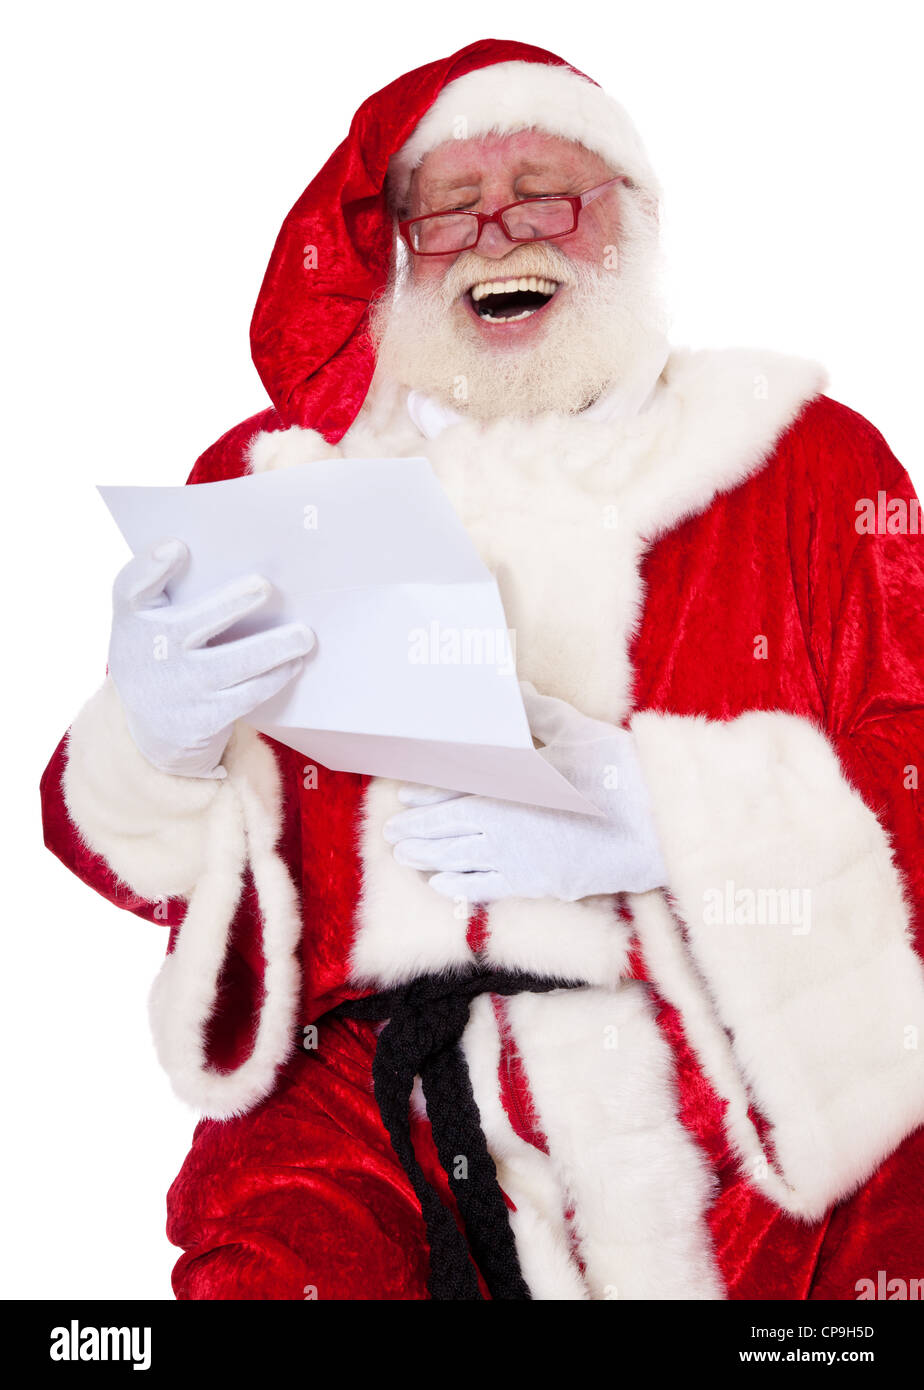 Santa Claus in authentic look having fun while reading the wish list. All on white background. Stock Photo